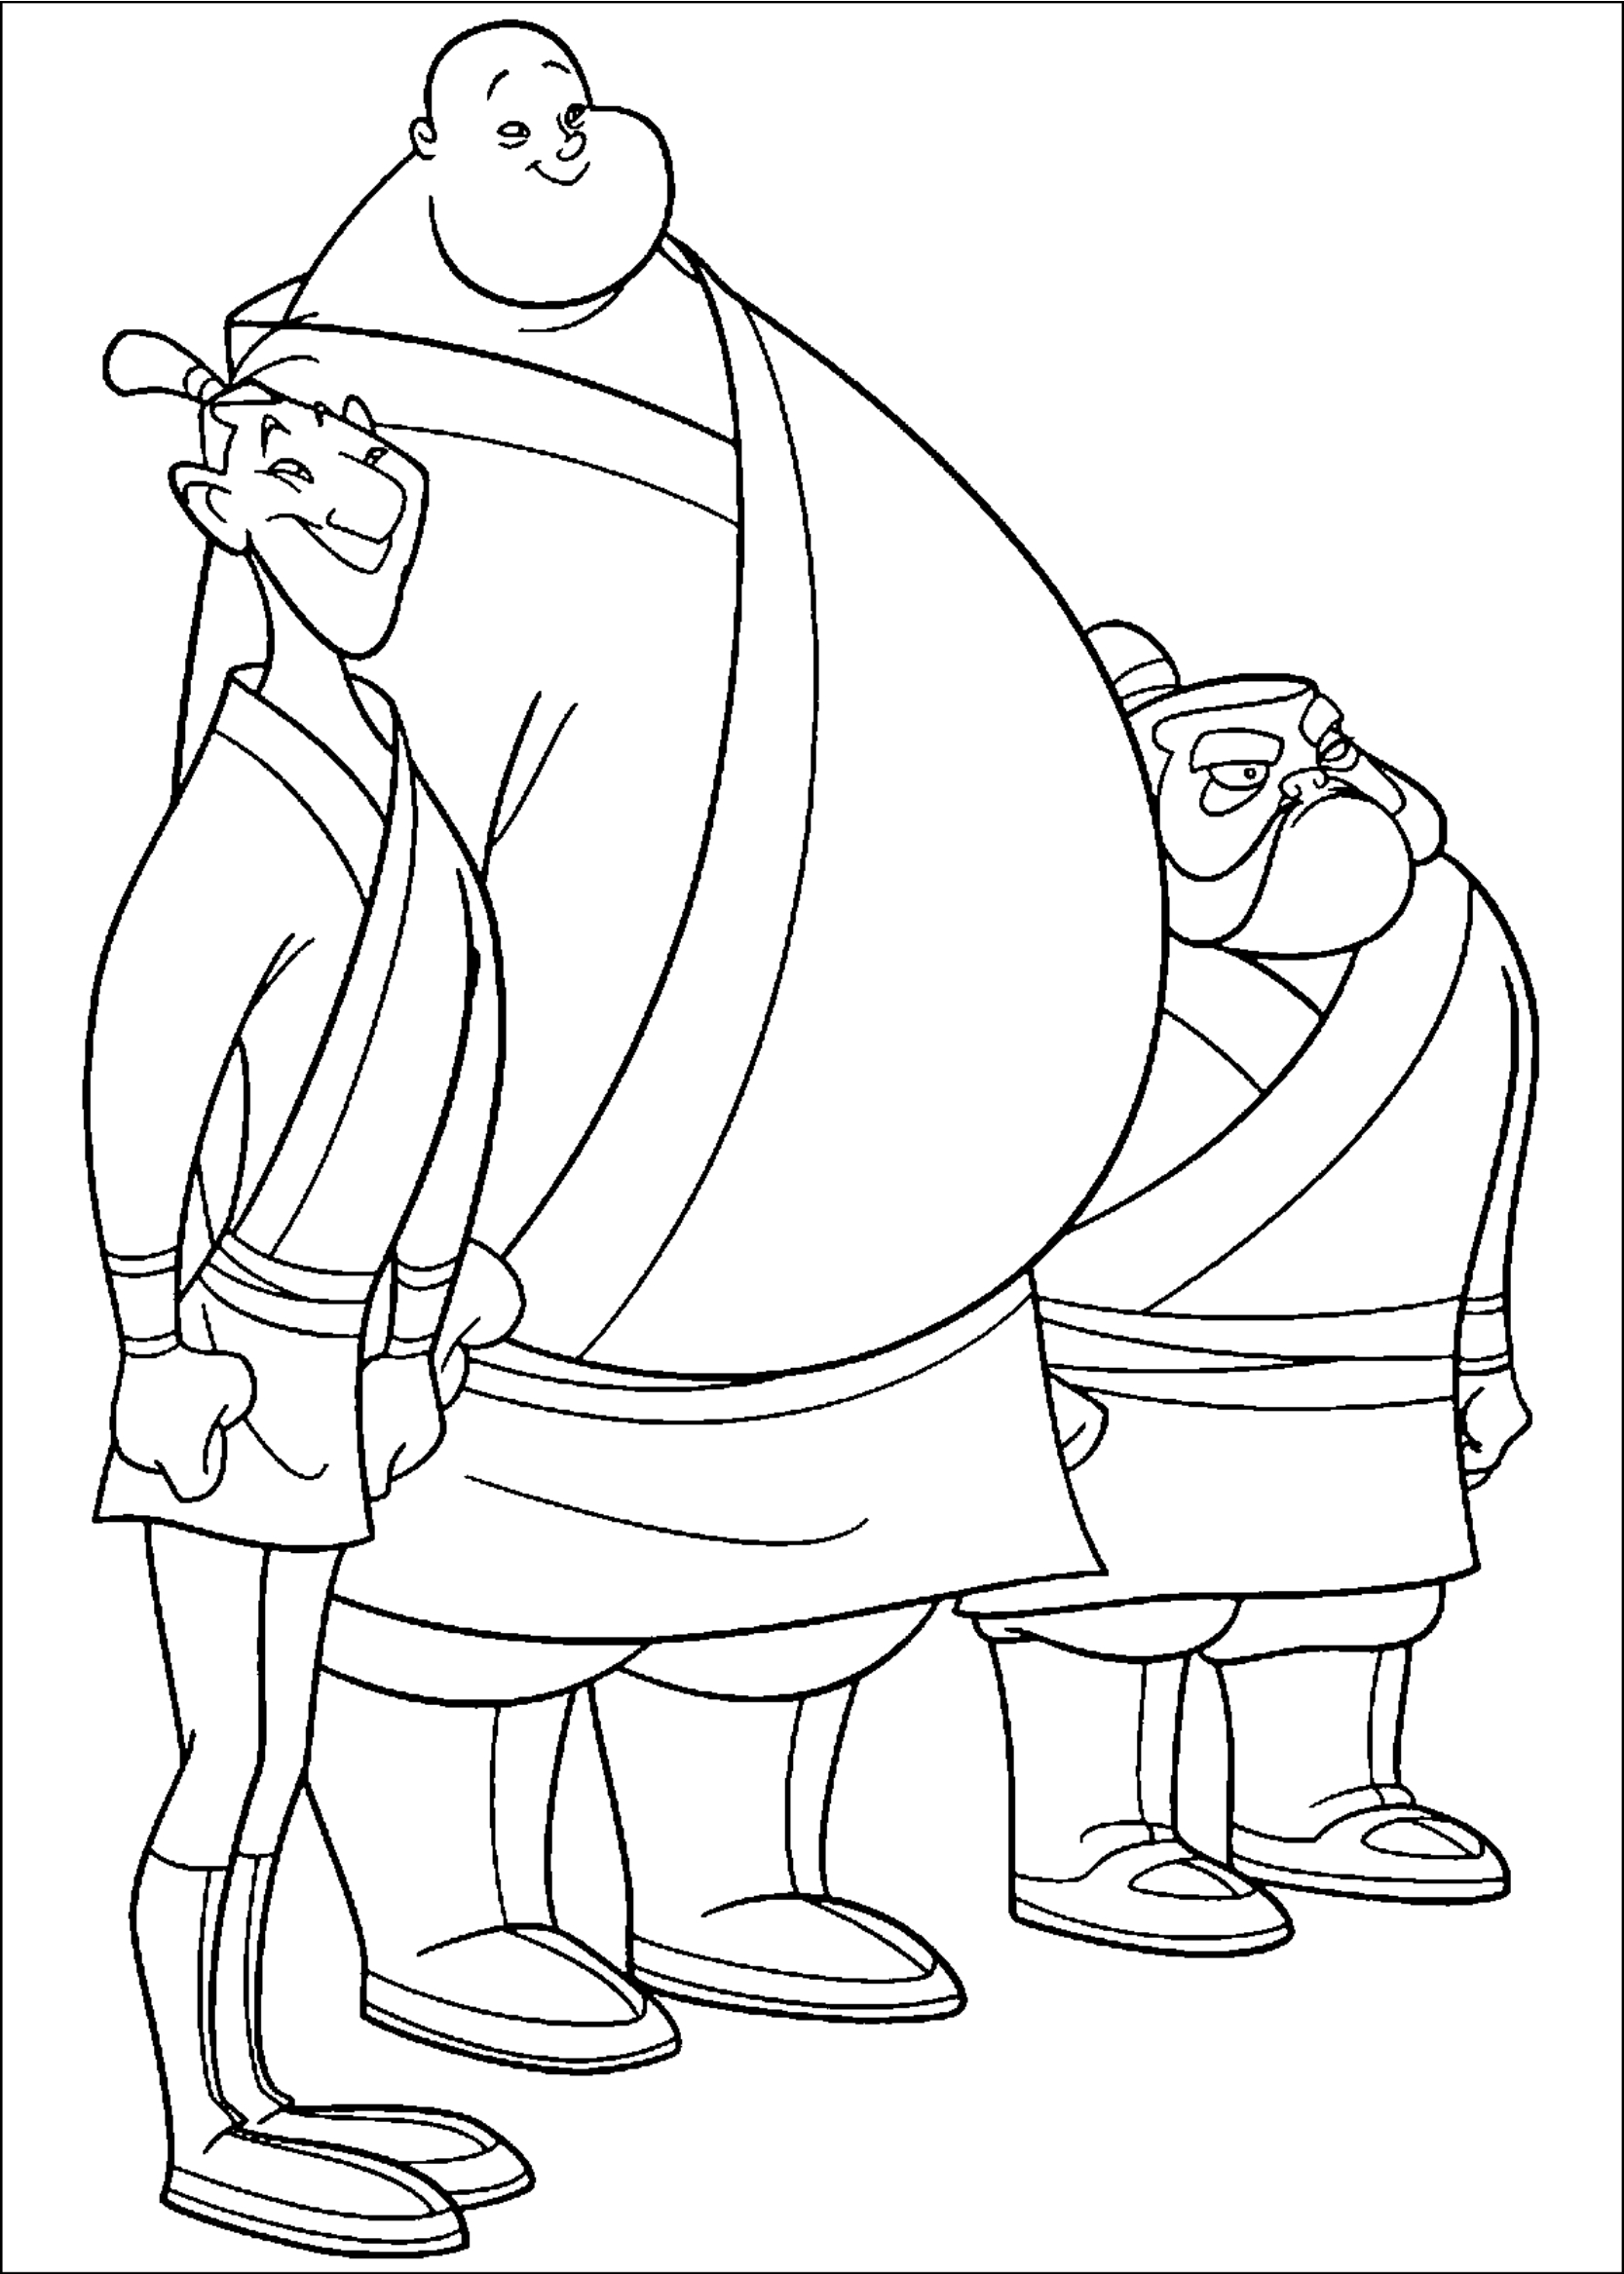 Mulan coloring pages to download and print for free